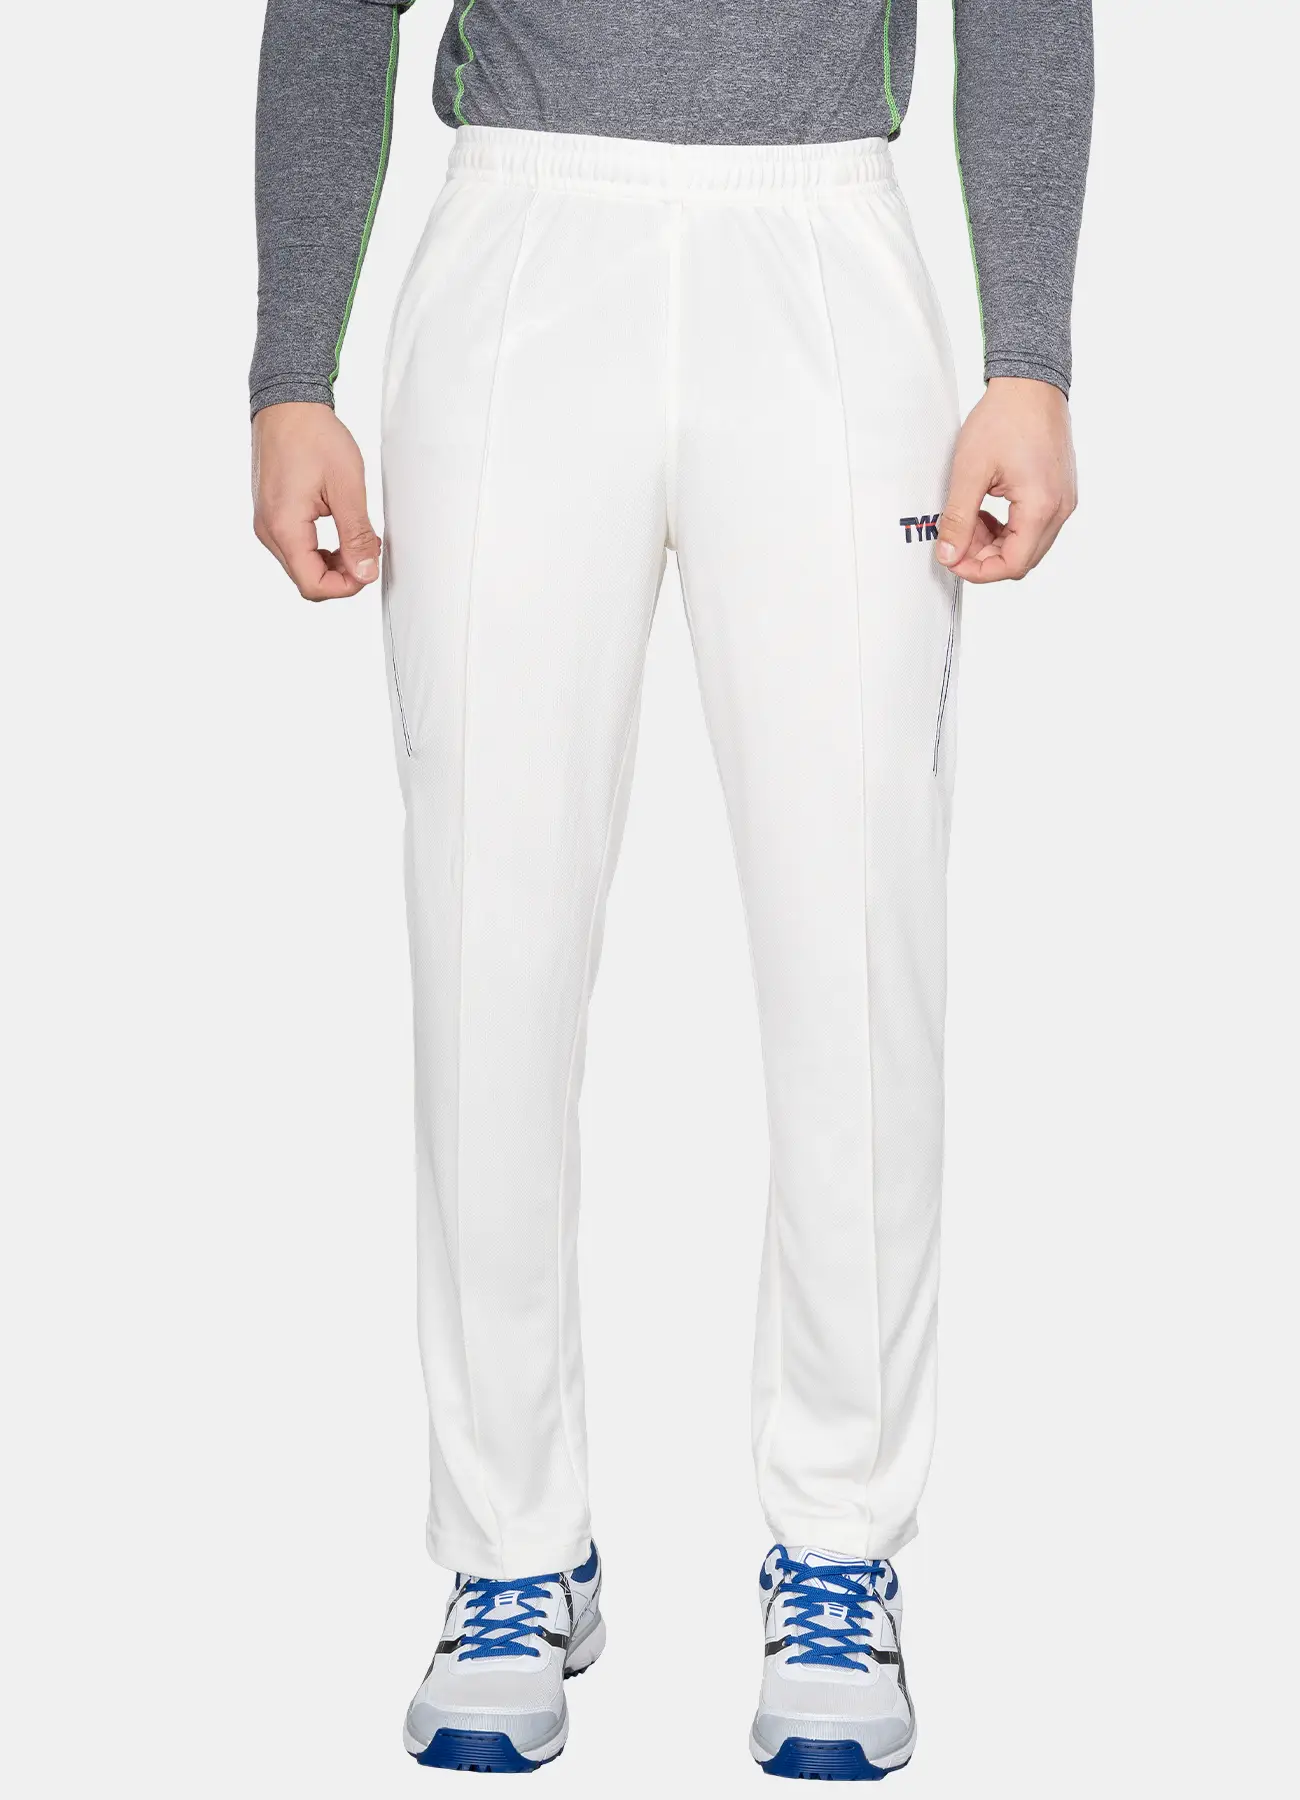 Buy Men White Atmos Cricket Track Pants From Fancode Shop.